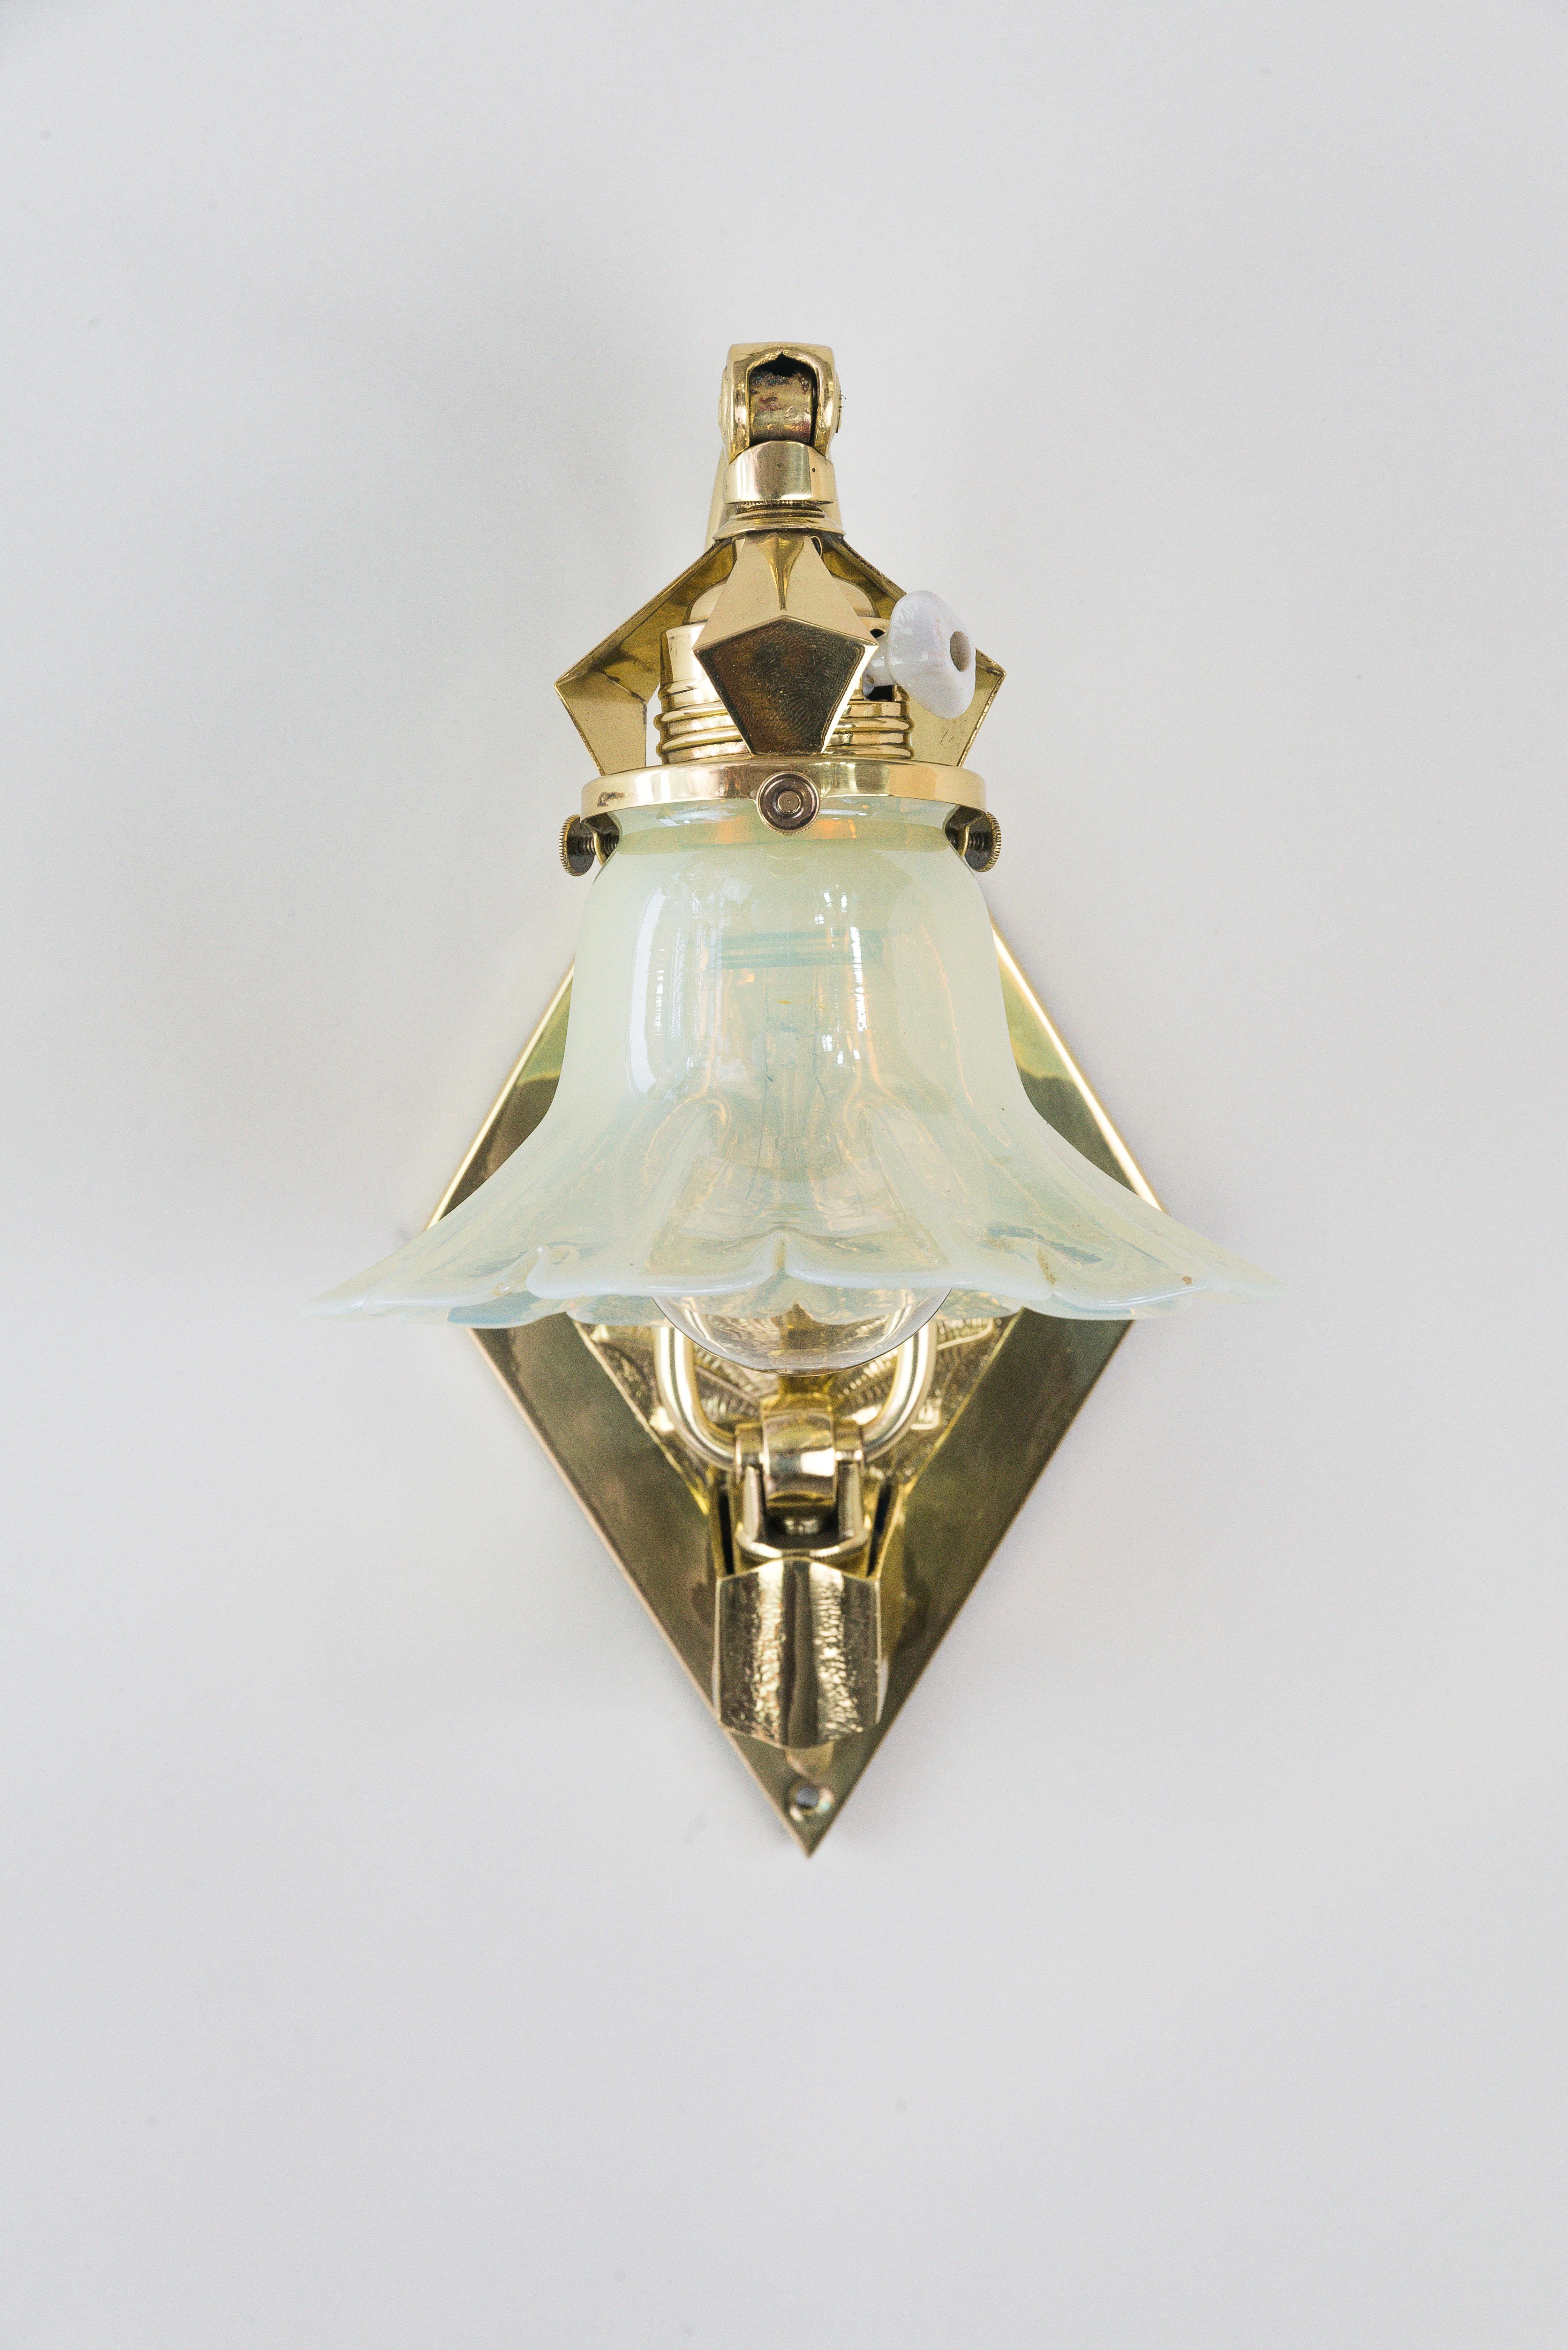 Early 20th Century Adjustable Art Deco Wall Lamp circa 1920s with Opaline Glass Shade